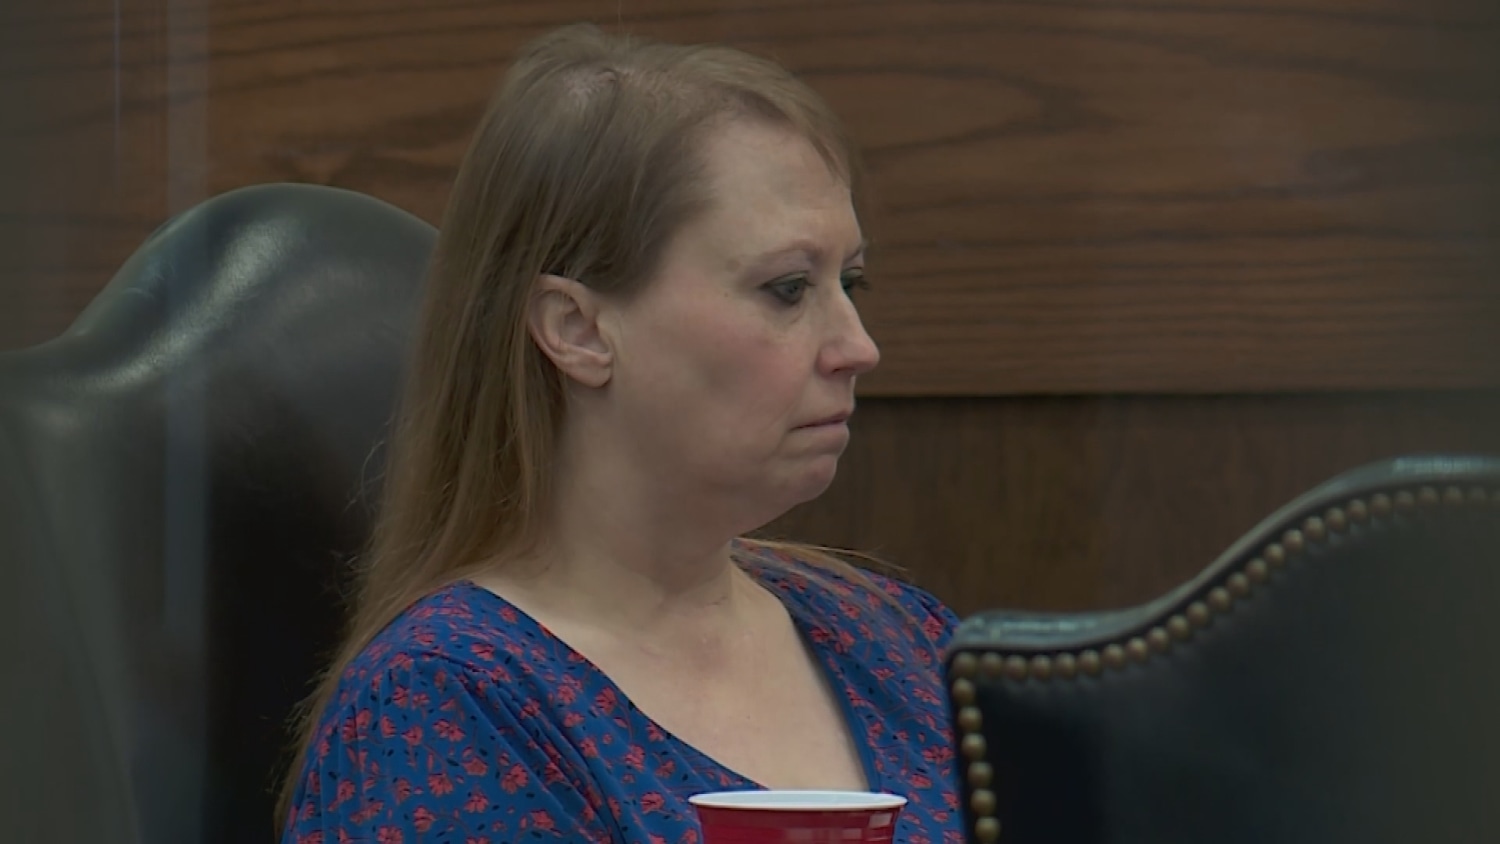 Oklahoma woman gets life in prison after admitting she asked her lover to kill her allegedly abusive pastor husband photo